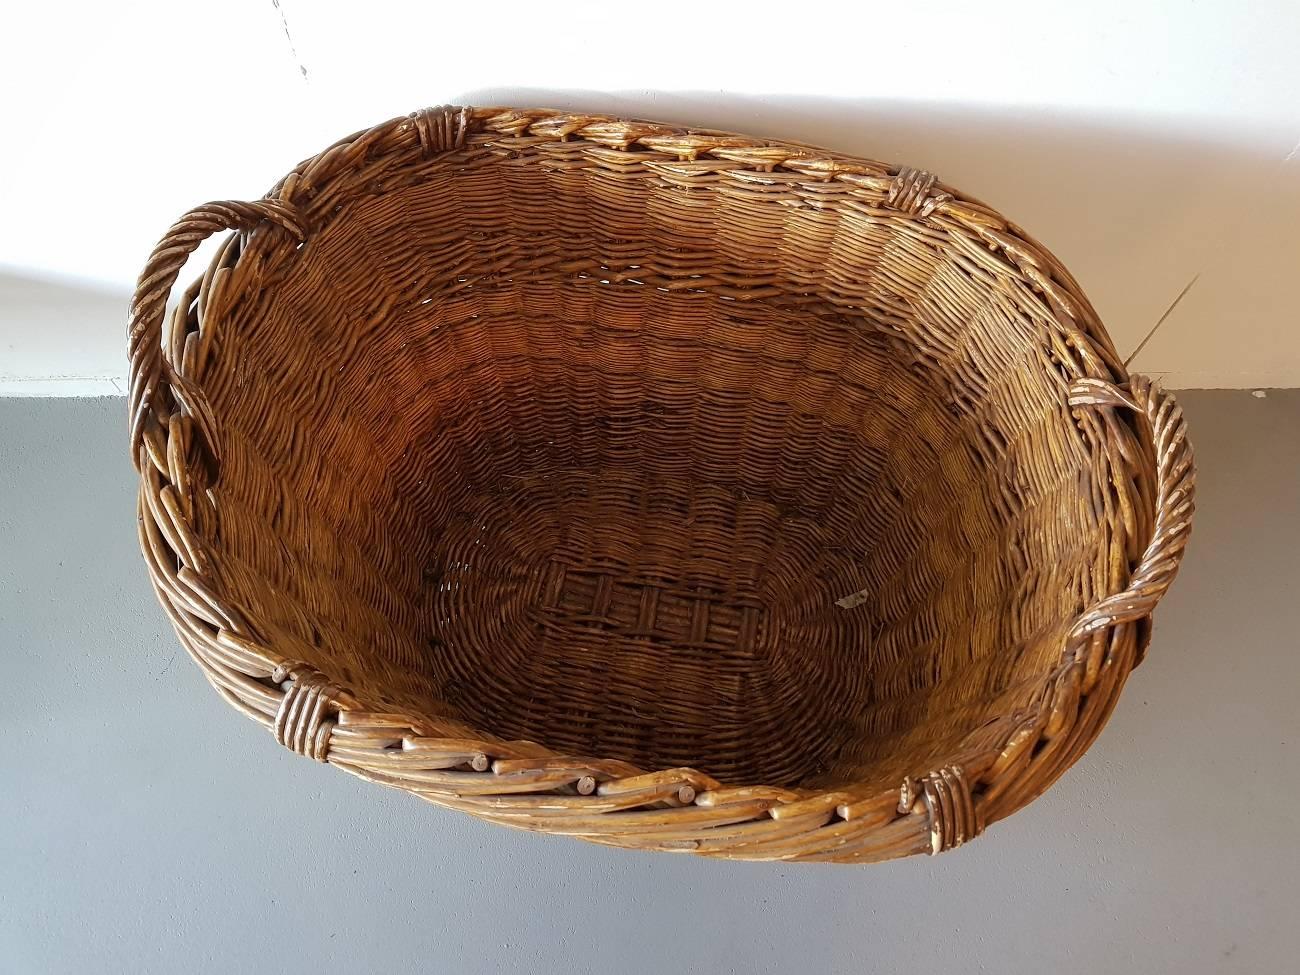 Beautiful French vintage handcrafted wicker grape basket made circa 1970s-1980s from the champagne region of Reims. This is in a good condition with wear by age and use.

The measurements are,
Depth 66 cm/ 25.9 inch.
Width 83 cm/ 32.6